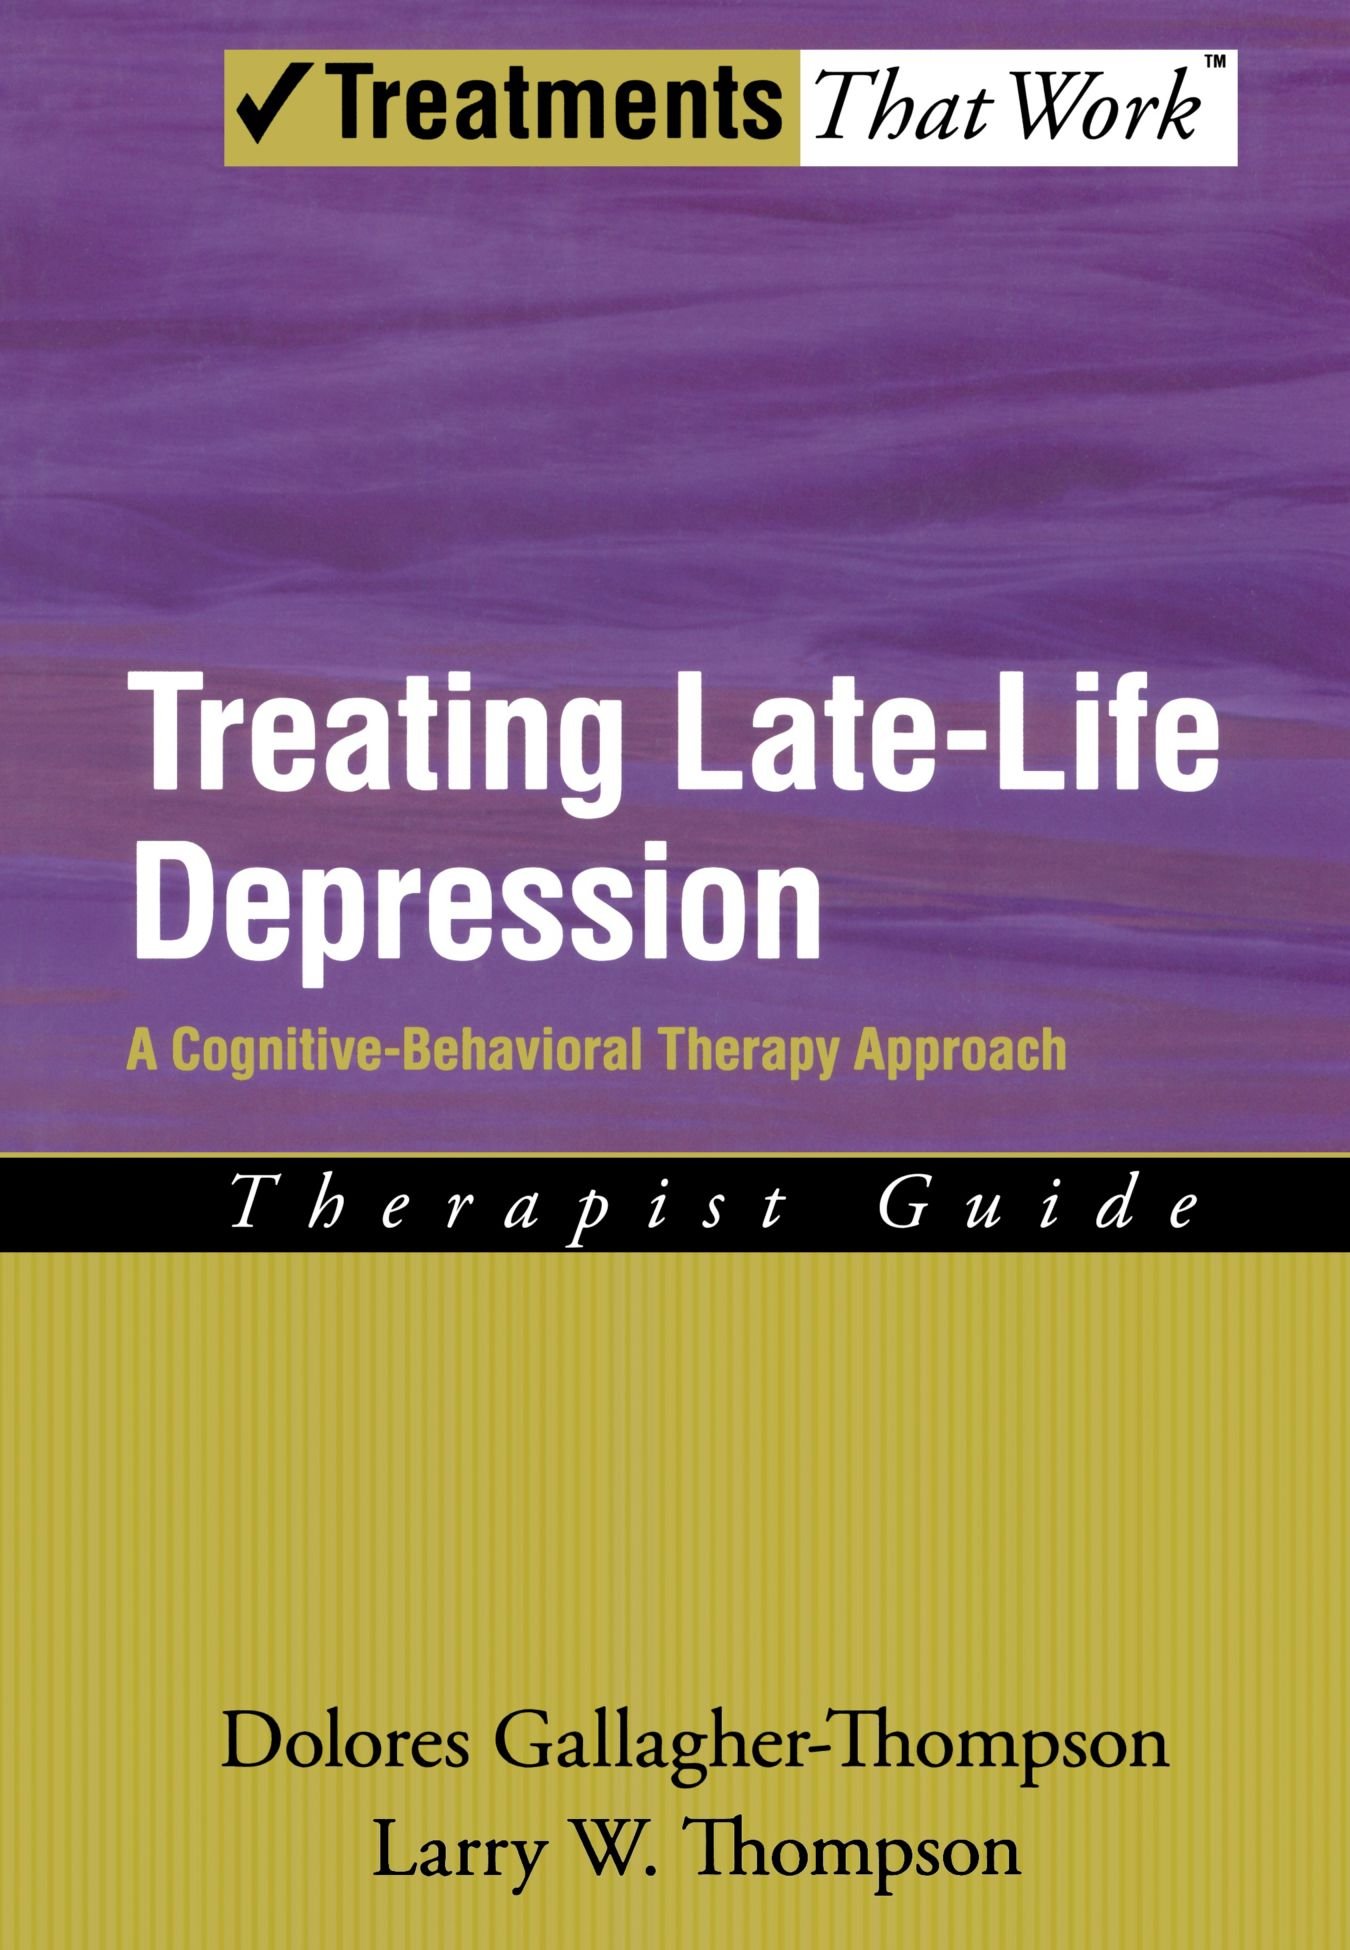 Treating Late Life Depression: A Cognitive-Behavioral Therapy Approach, Therapist Guide (Treatments That Work)